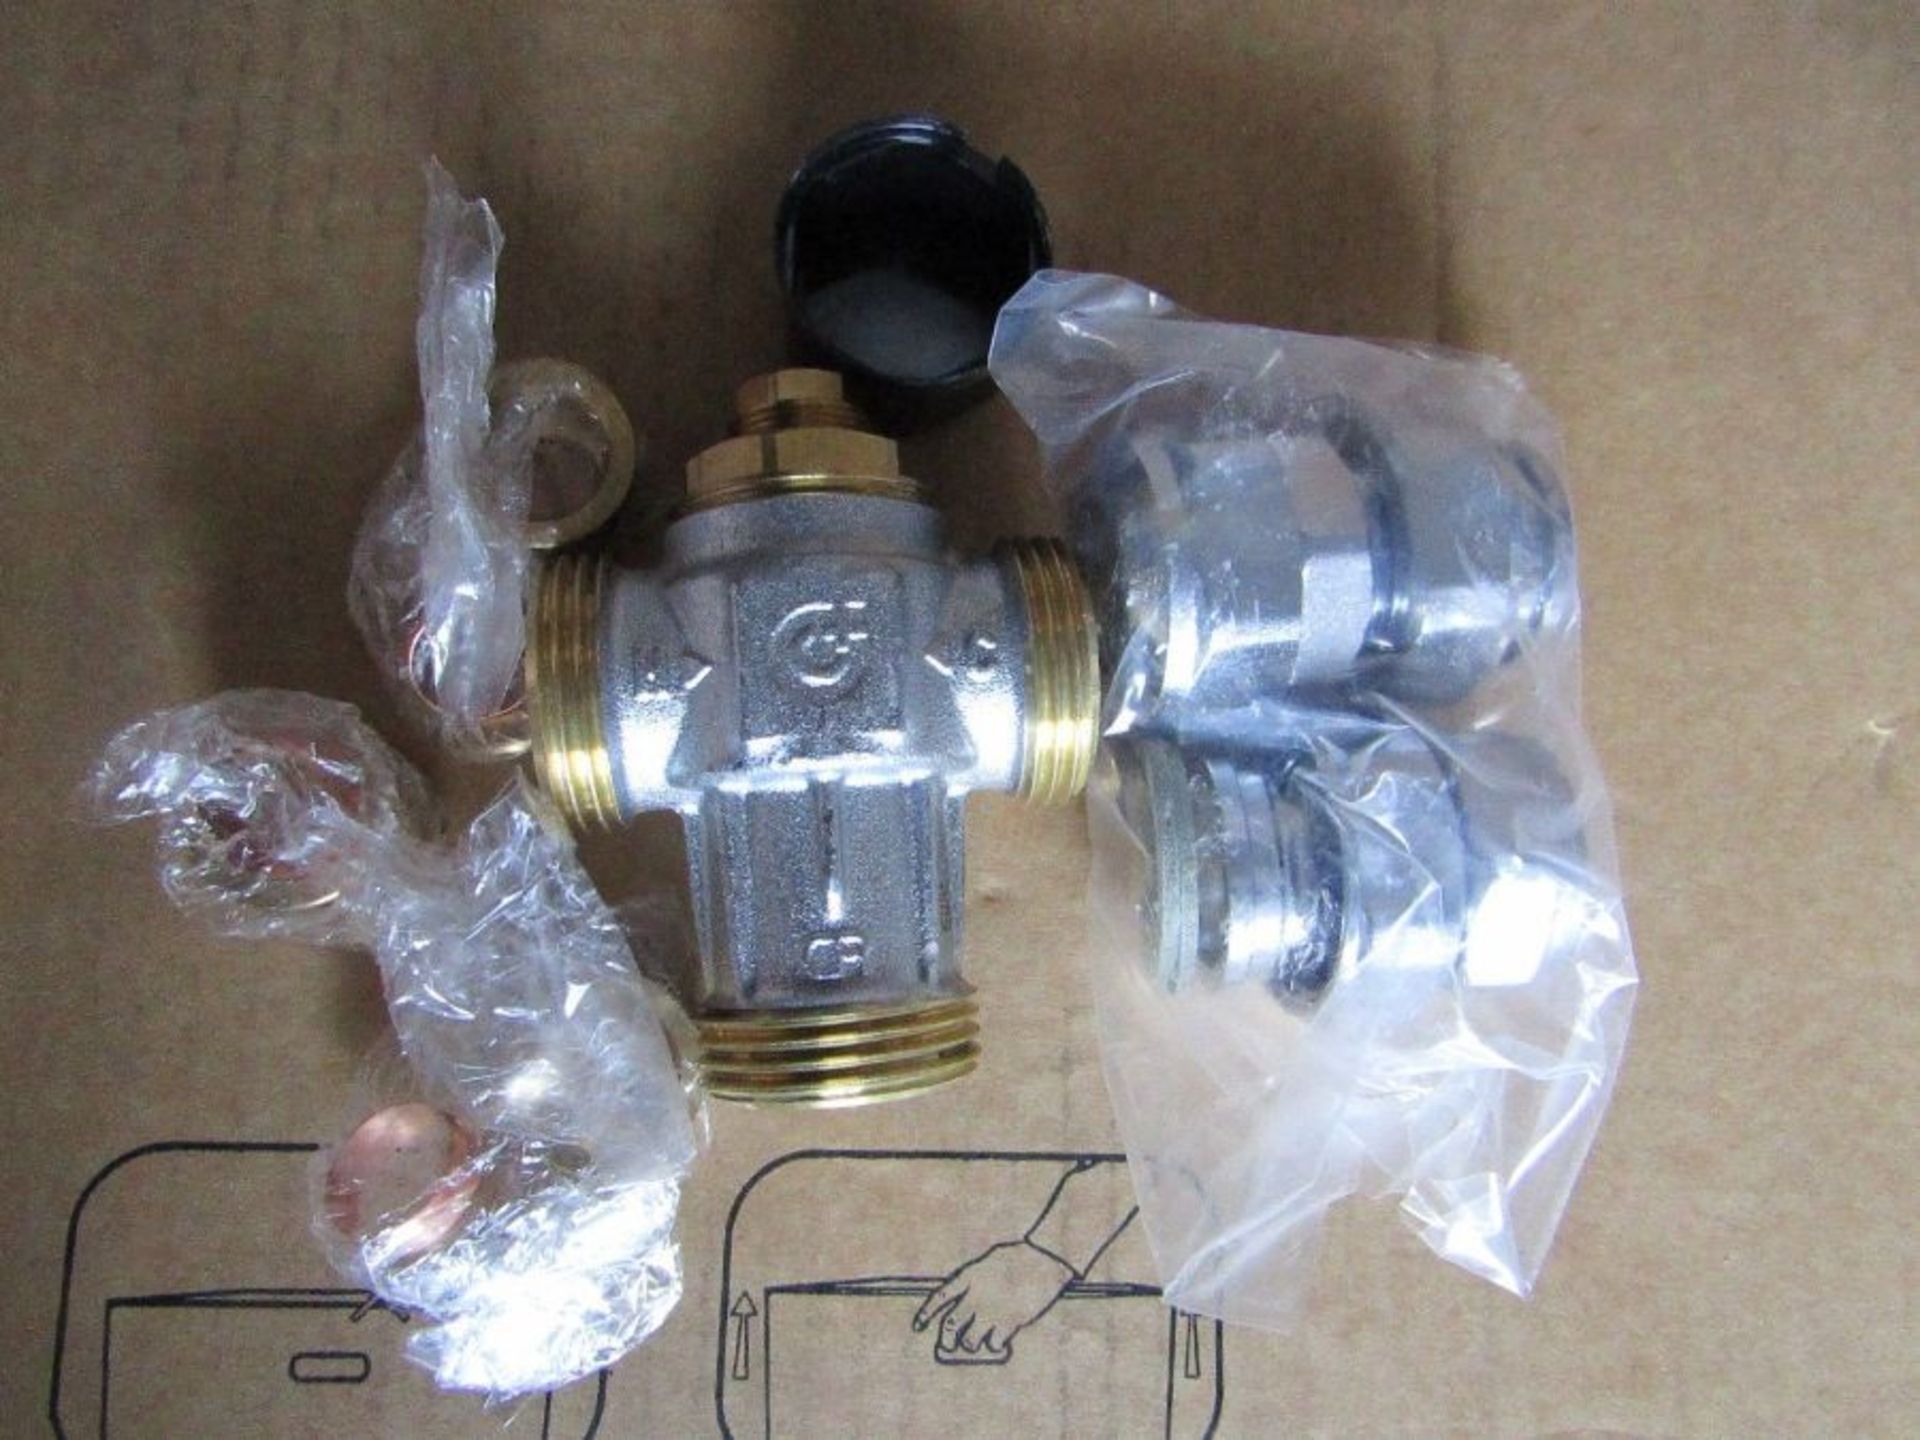 30 x Altecnic Brass Thermostatic Washroom Mixing Valve 22mm Compression H9554 7770368 - Image 3 of 4